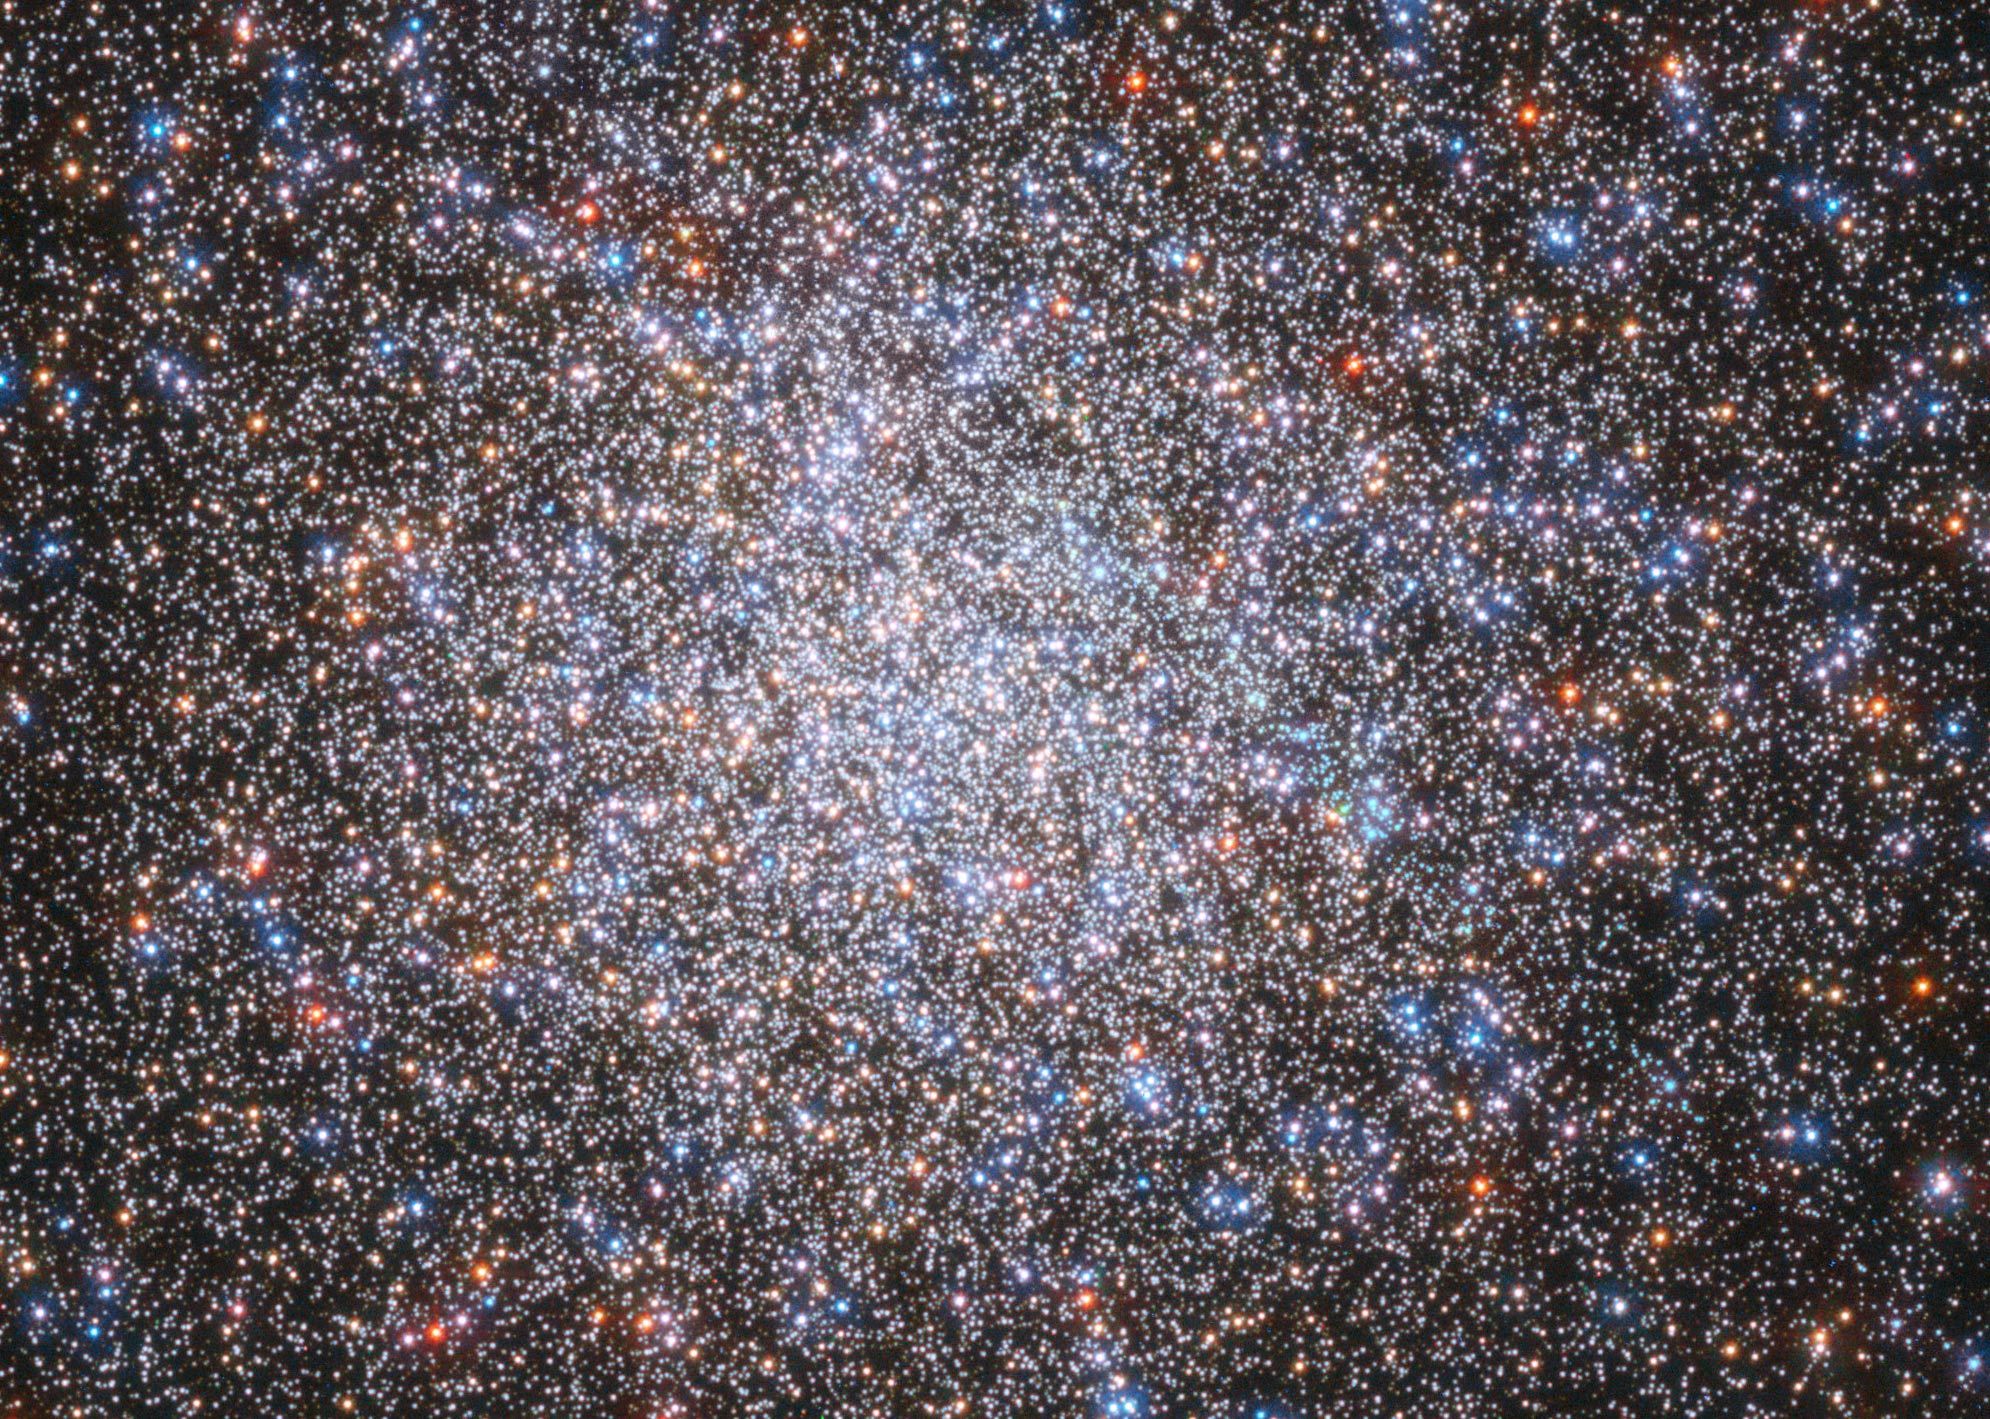 The core of the globular cluster M2 is packed with stars. Credit: ESA/Hubble & NASA, G. Piotto et al.